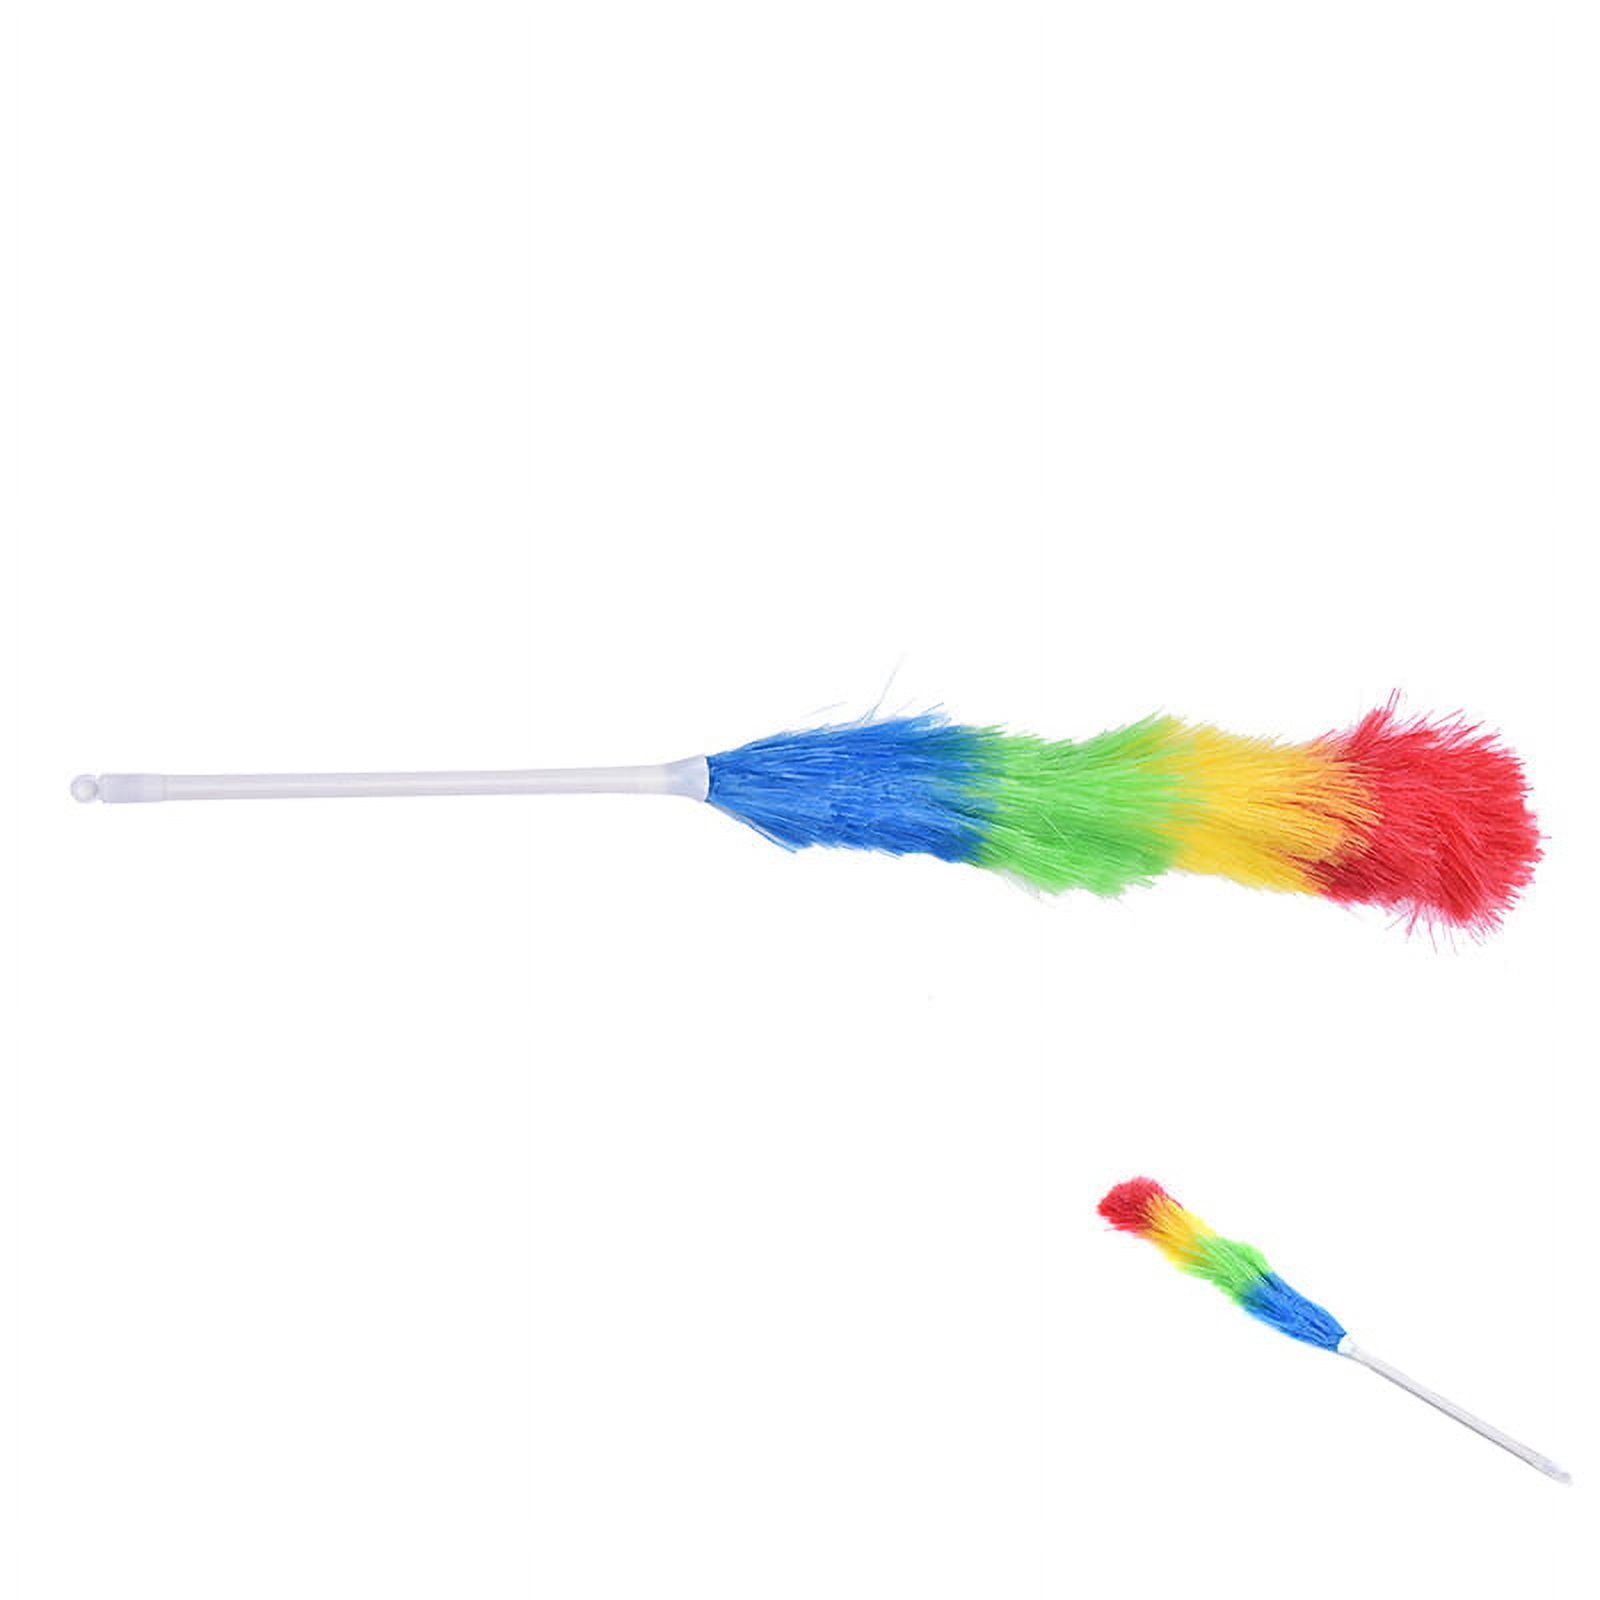 Microfibre Duster Soft Feather 41-88cm Fluffy Brush Magic Cleaning Dust  Cleaner